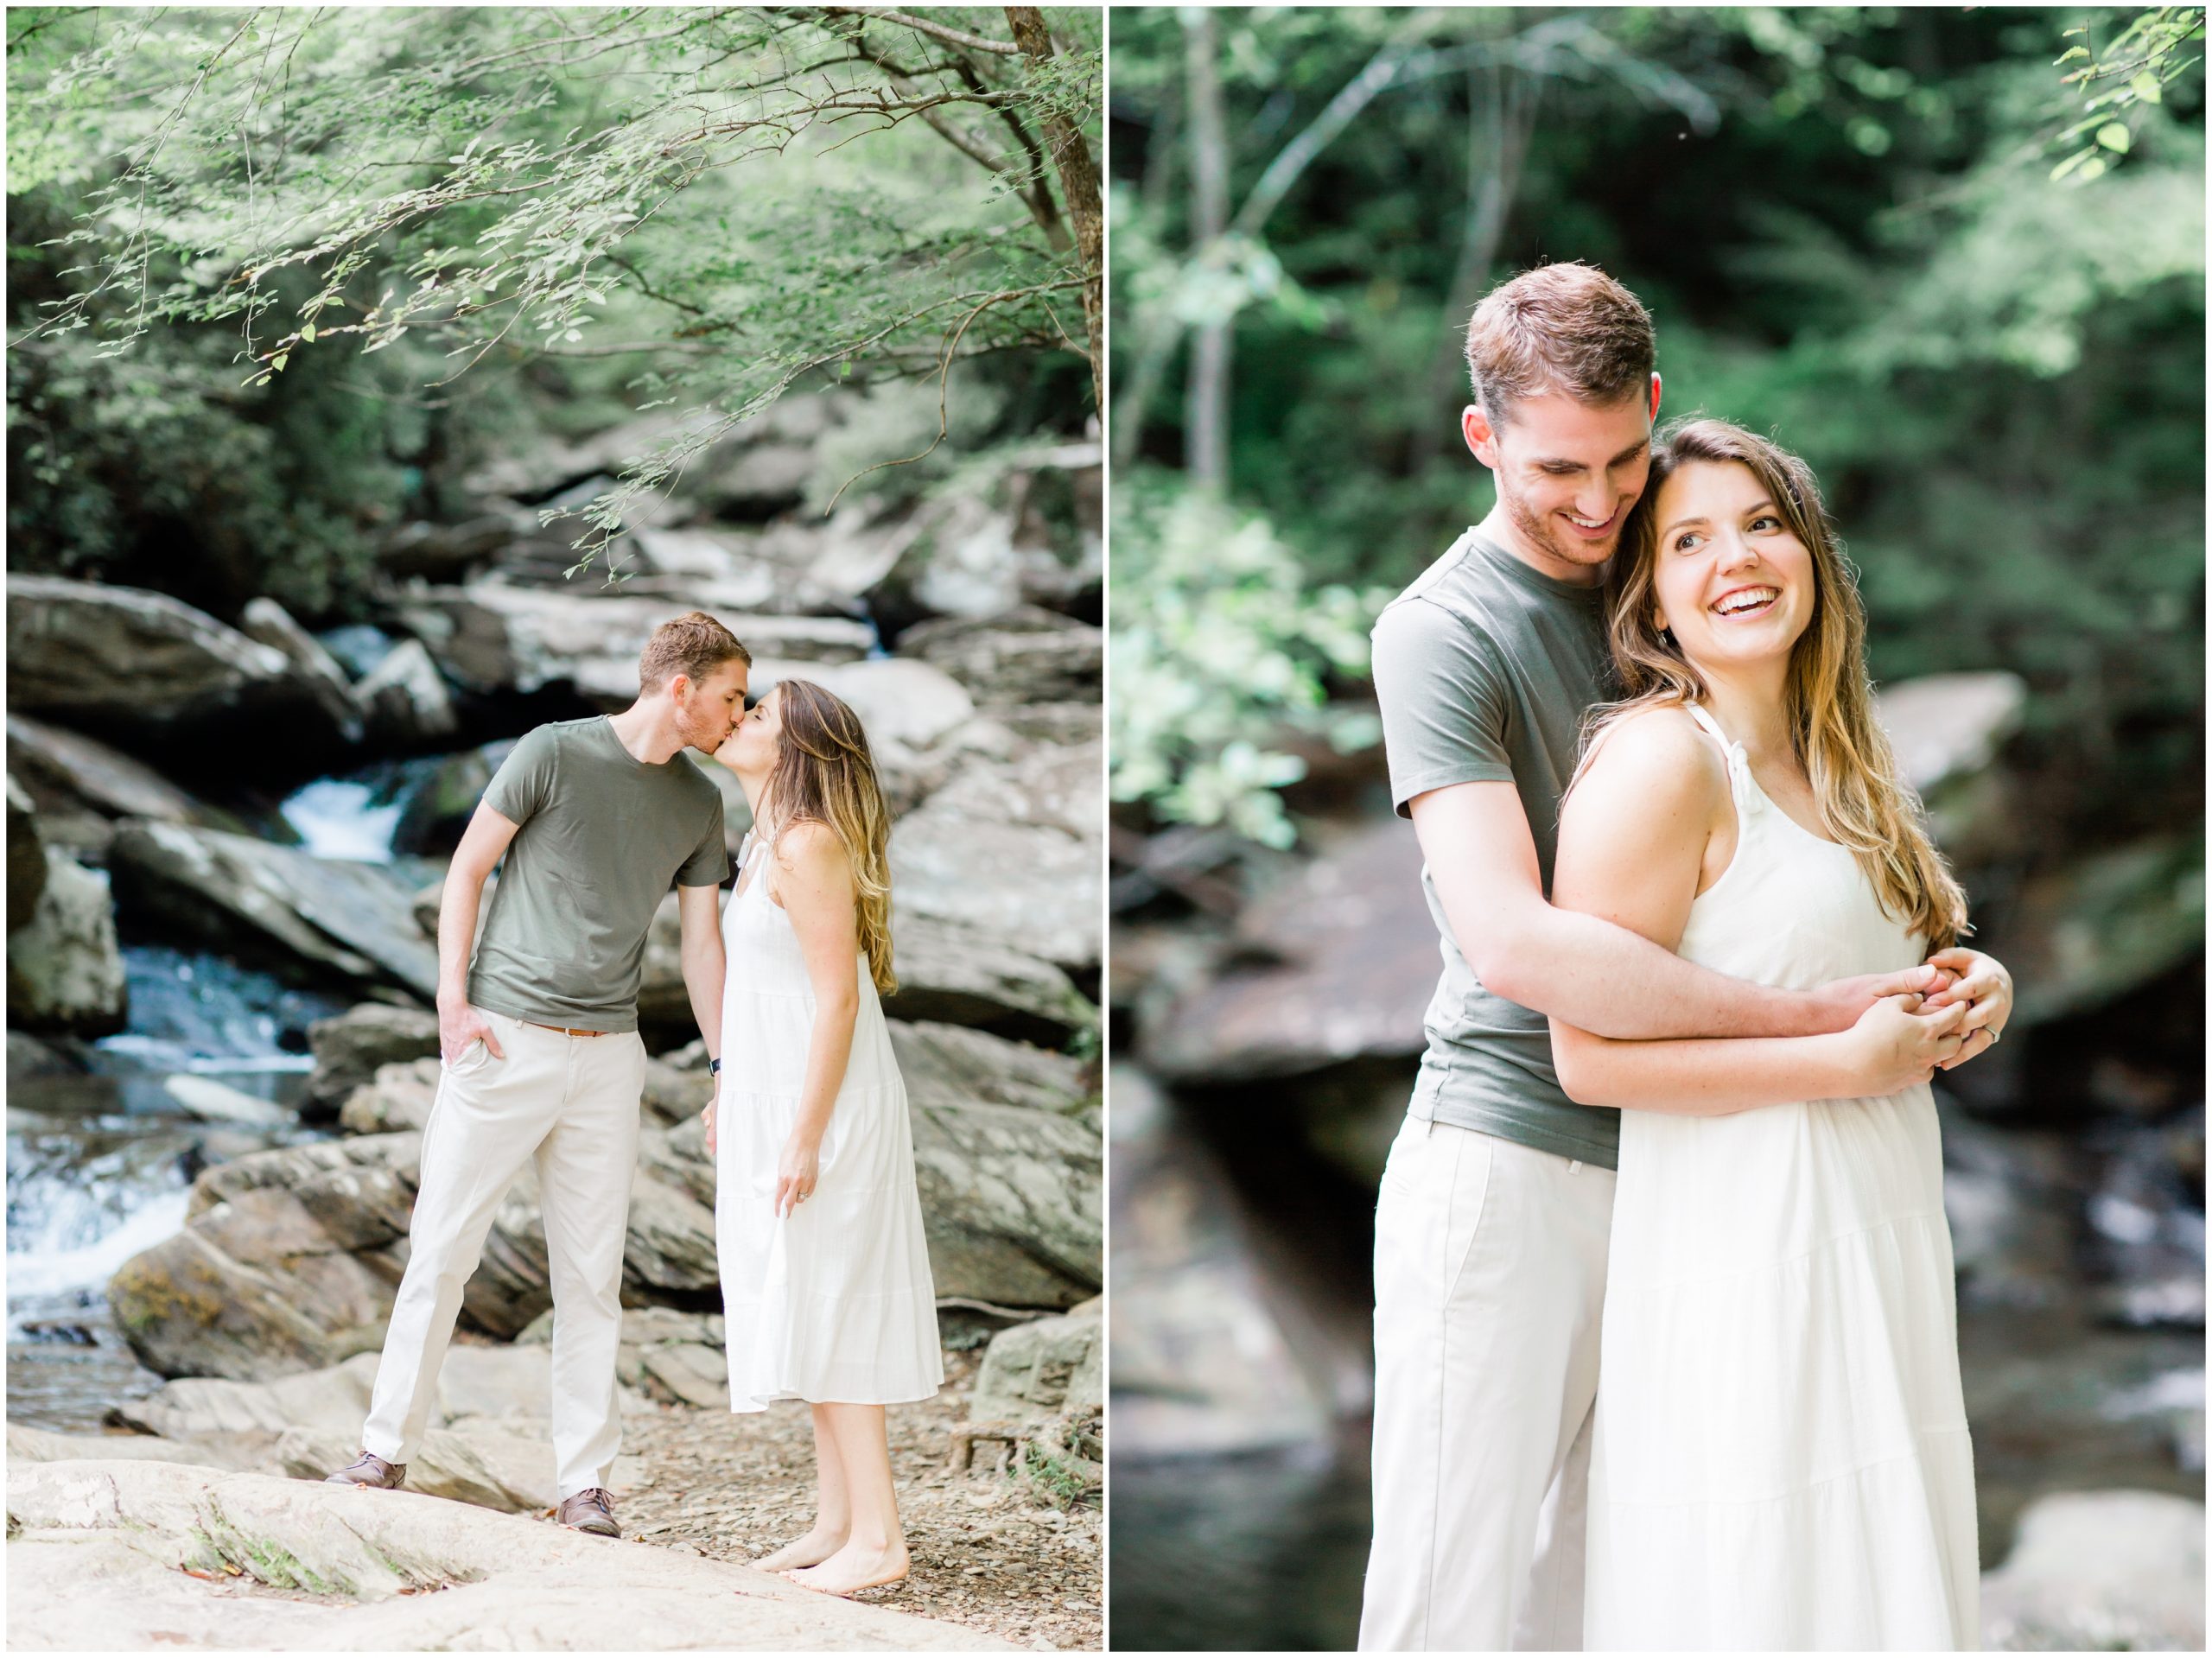 brianna & jonathan lowery's anniversary session in the cherokee national forest